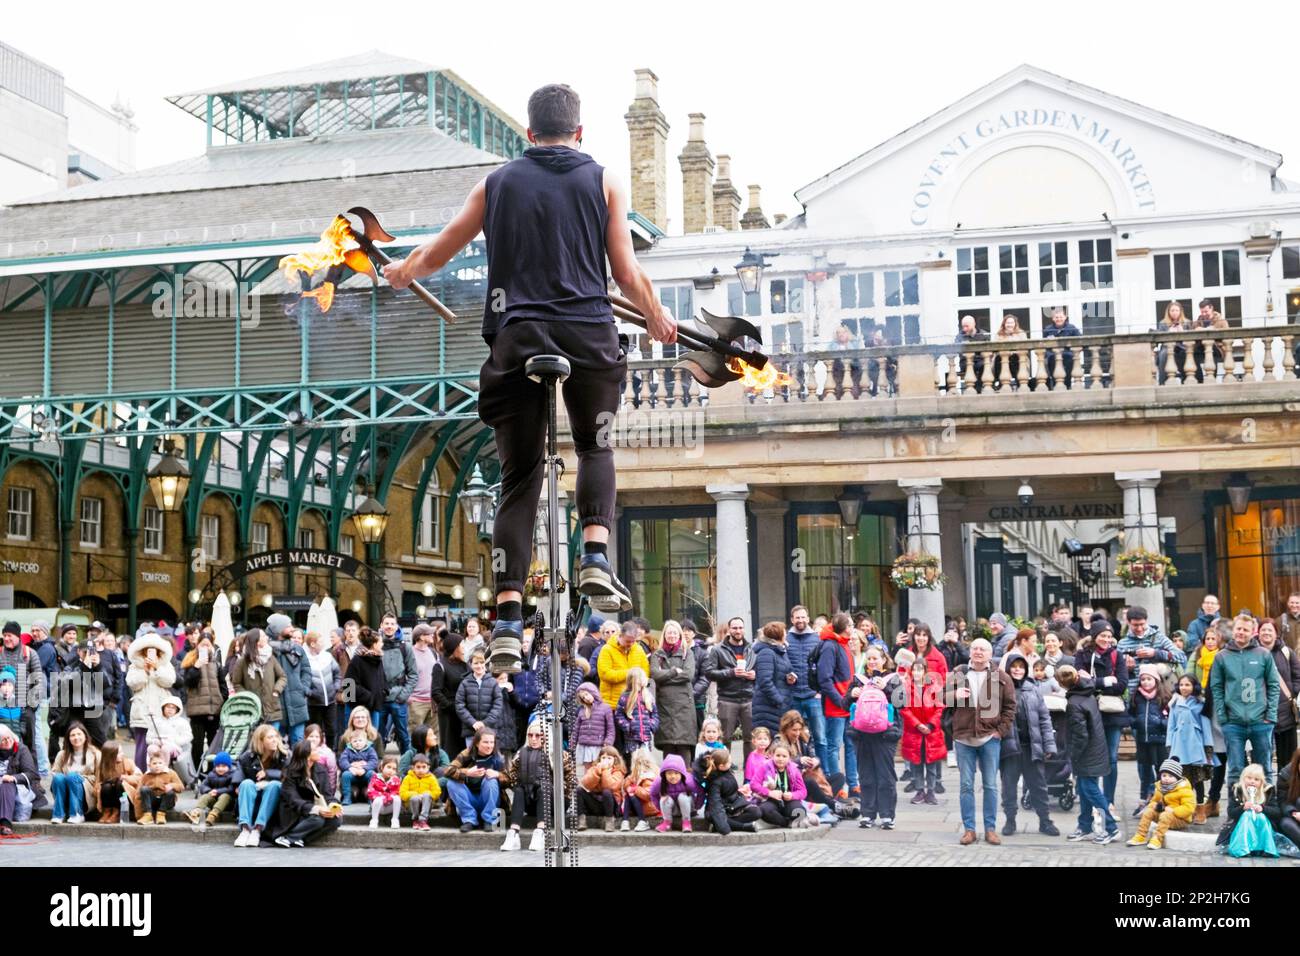 Crowd of people tourists watching live street performer at Covent Garden market in London WC2 England UK  KATHY DEWITT Stock Photo